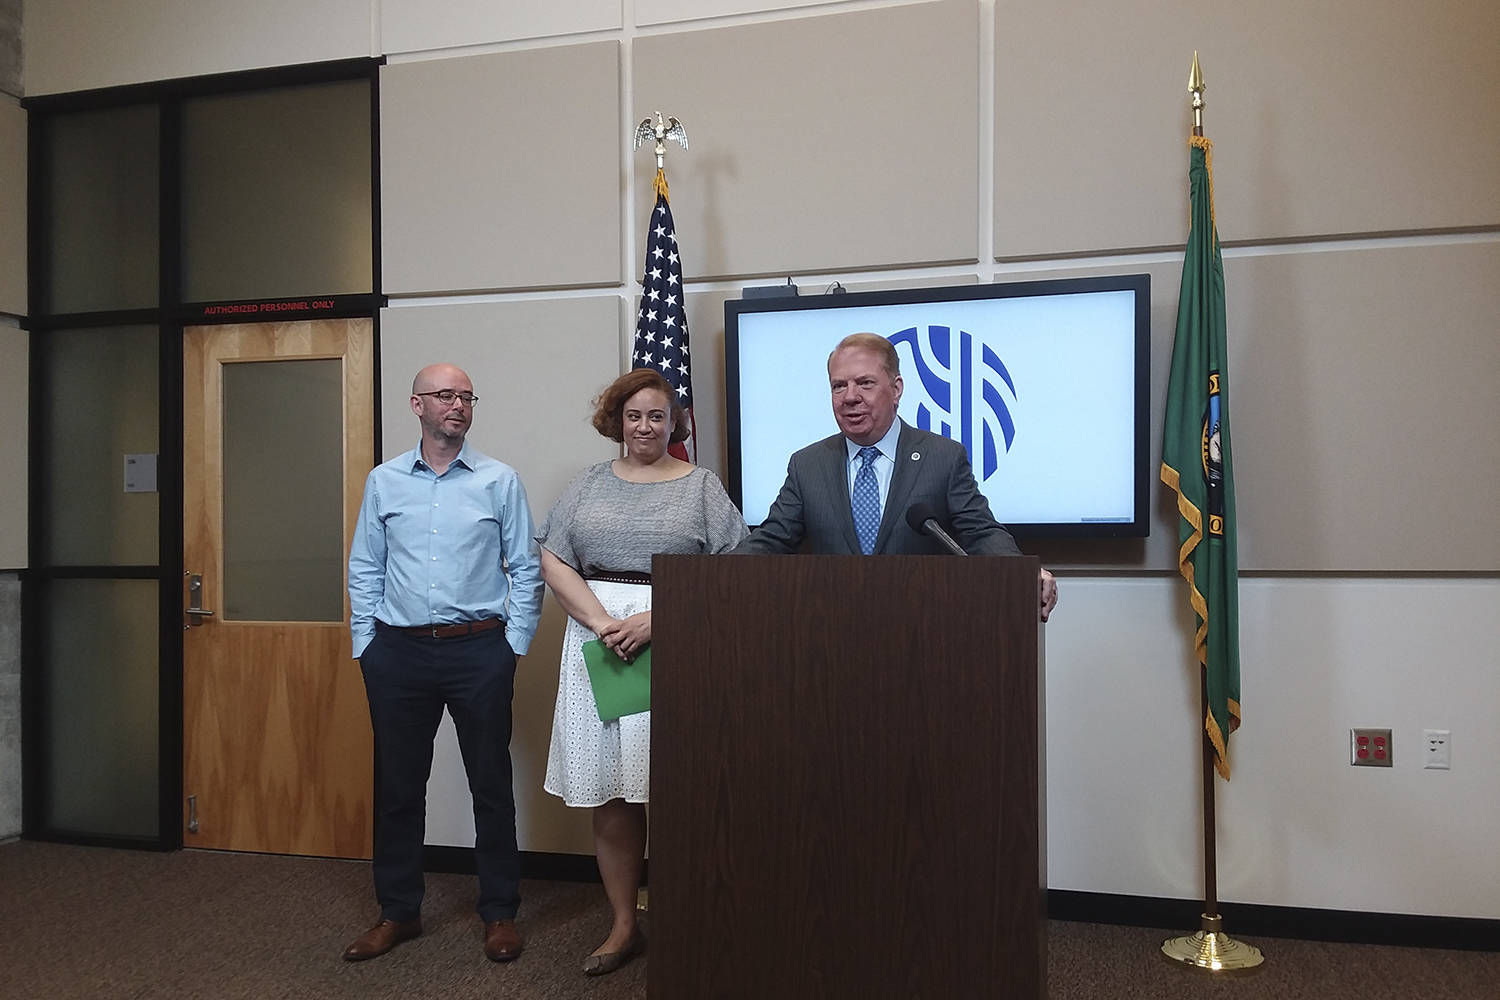 Mayor Ed Murray, flanked by HSD director Catherine Lester and All Home KC director Mark Putnam, announces the city’s new RFP for $30 million in homelessness services. Photo by Casey Jaywork